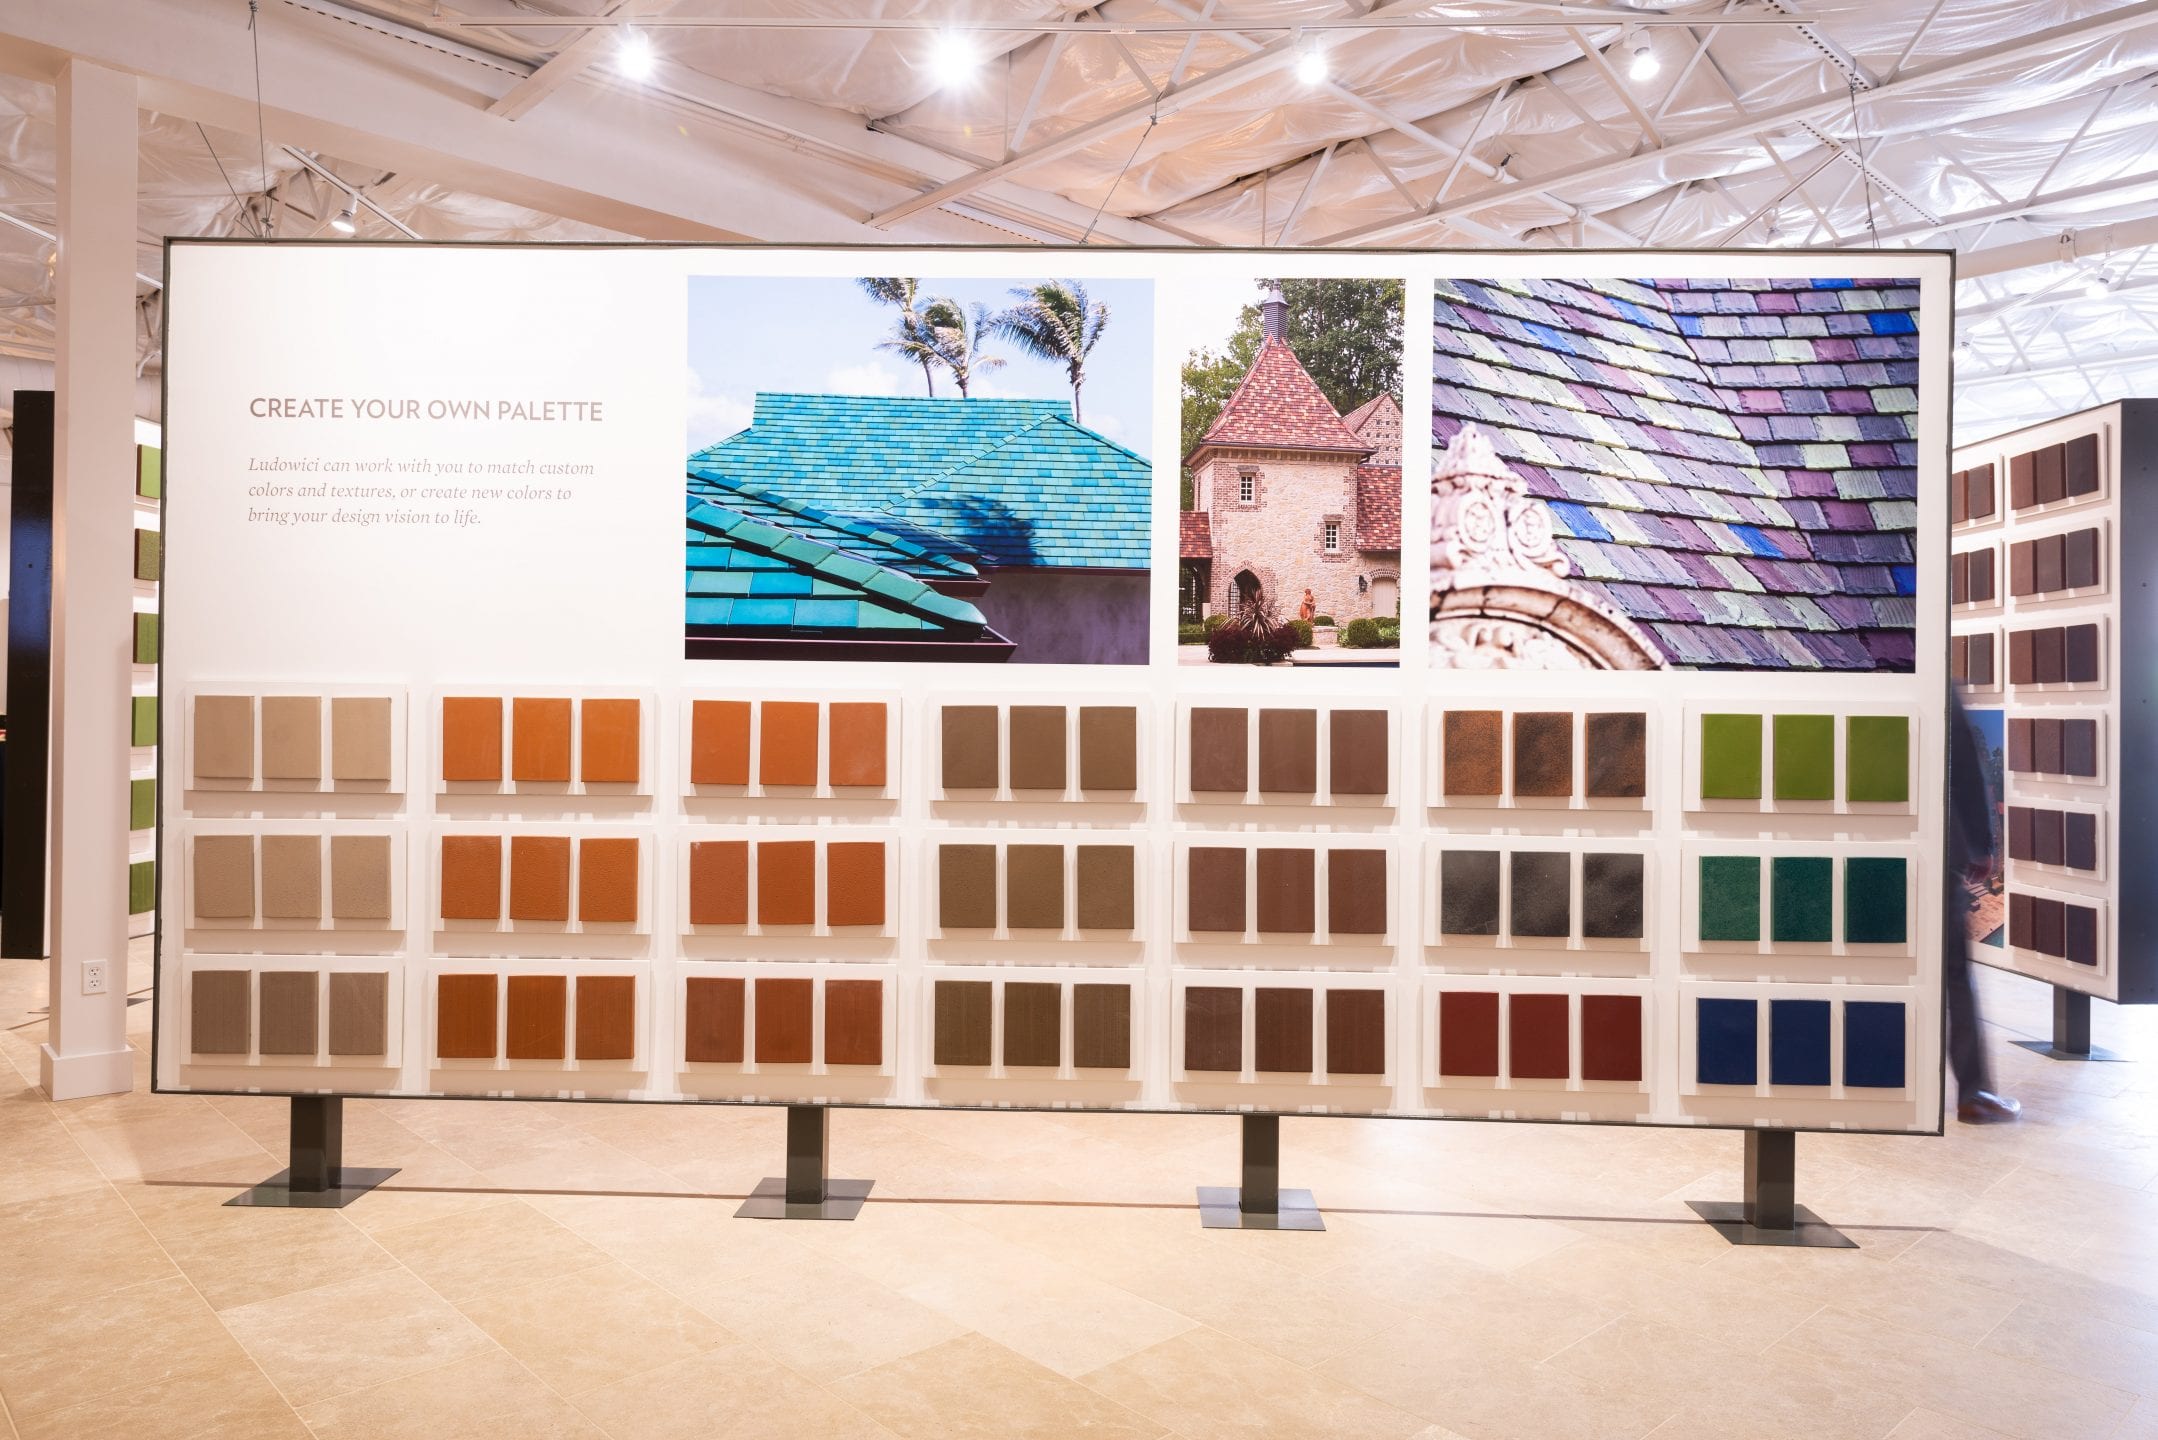 With over 45 roof tile displays, 200 texture and color boards, and 50 flooring vignettes – the design inspiration is endless.